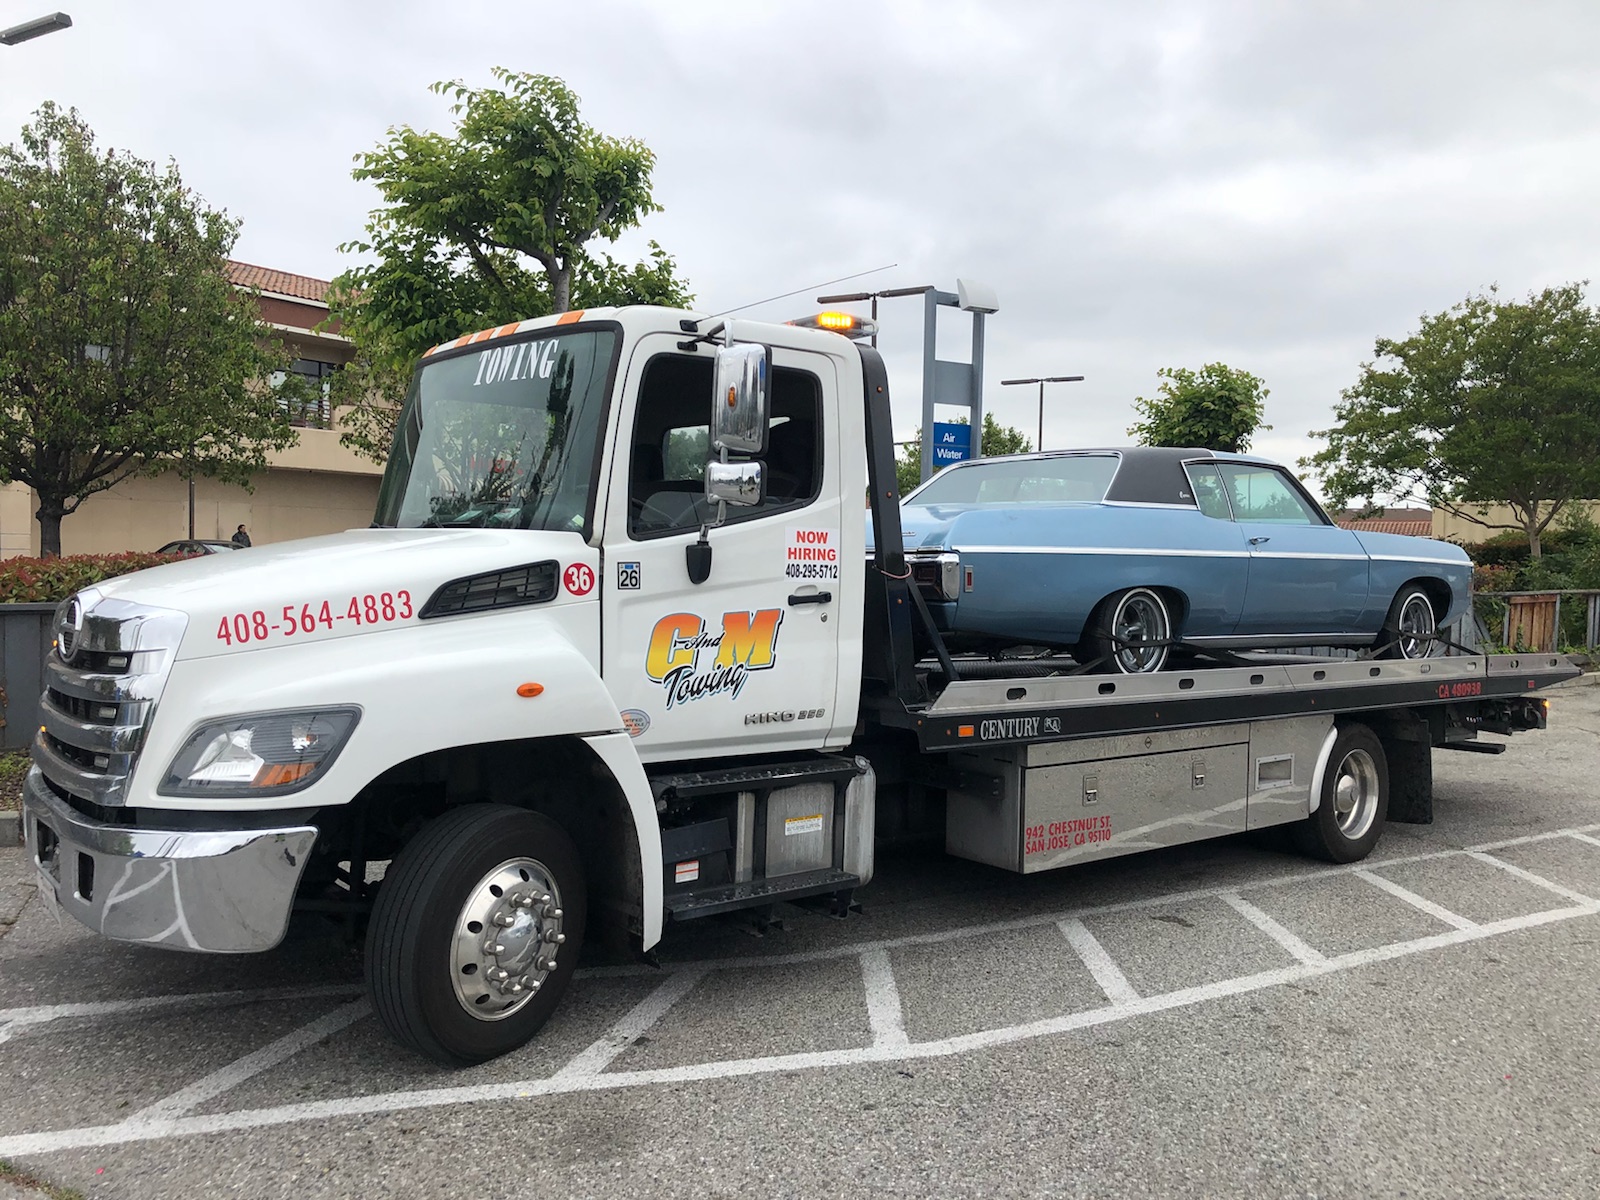 Towing Services Can Be Great Aid in Emergency